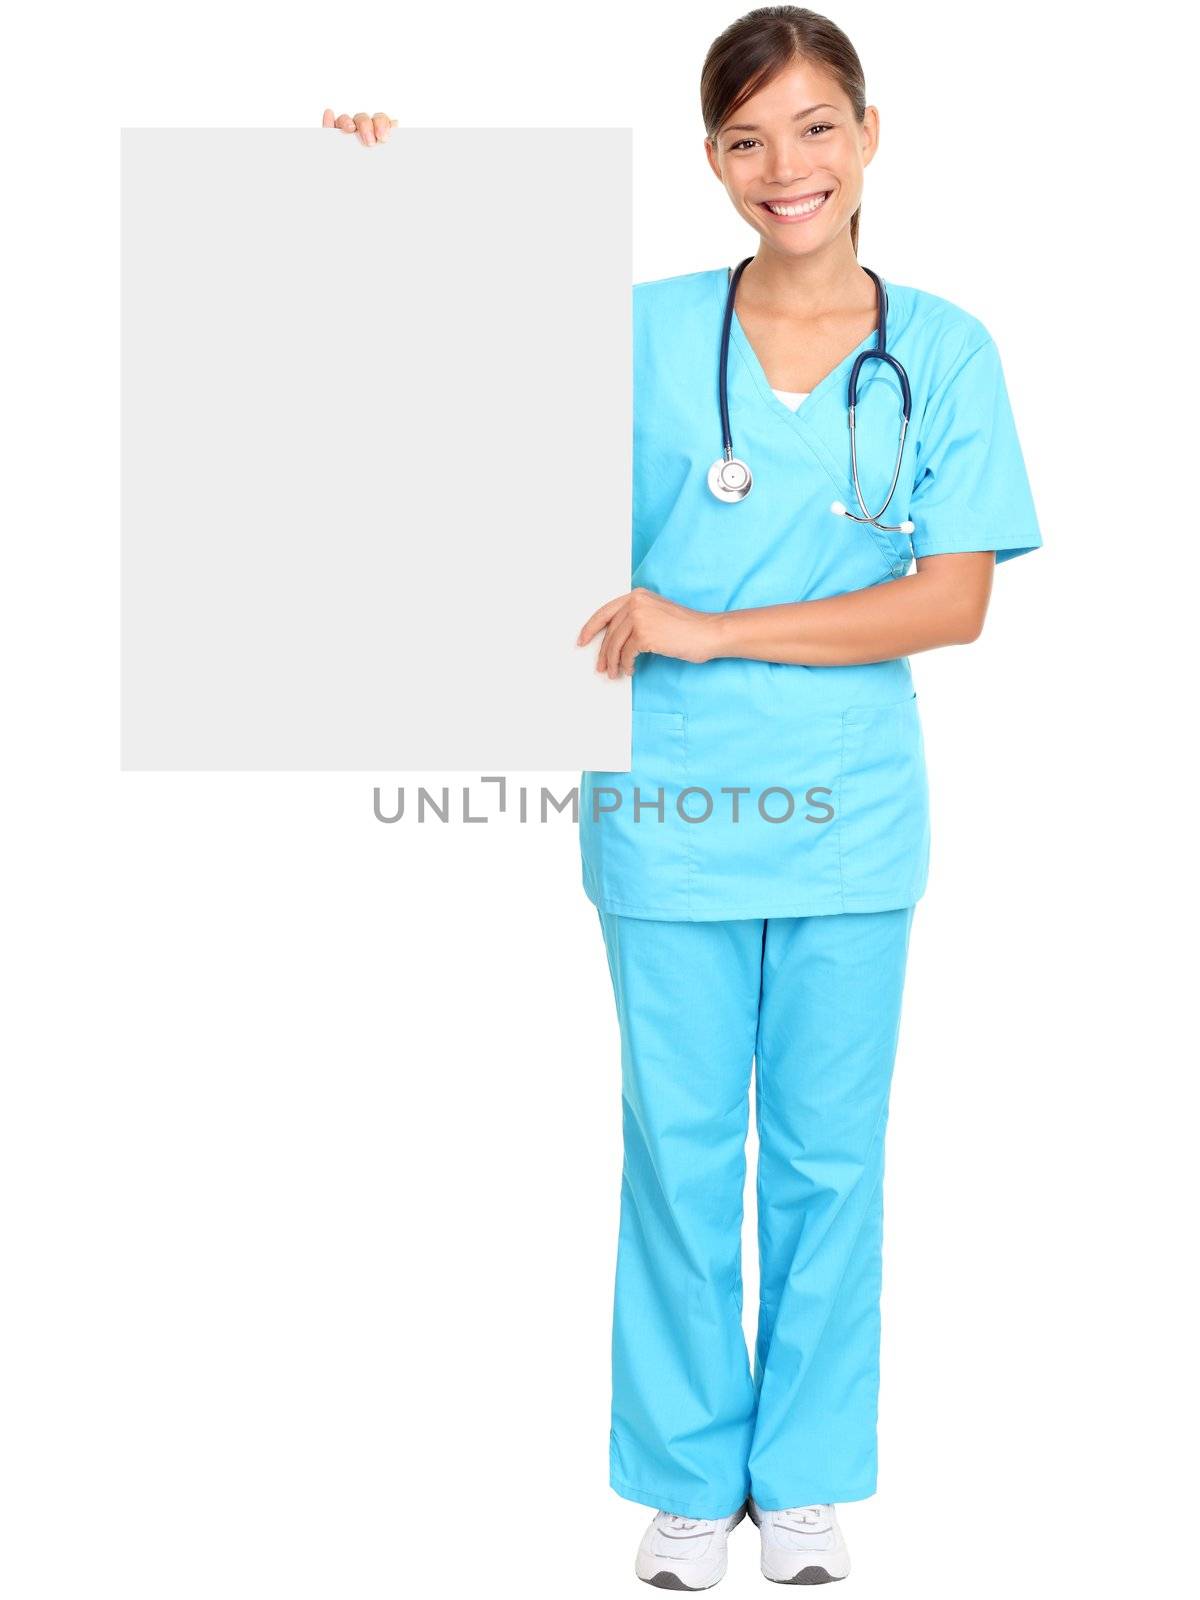 Medical doctor showing blank empty billboard sign poster. Young female doctor / nurse standing in full body isolated over white background. Asian / Caucasian woman.